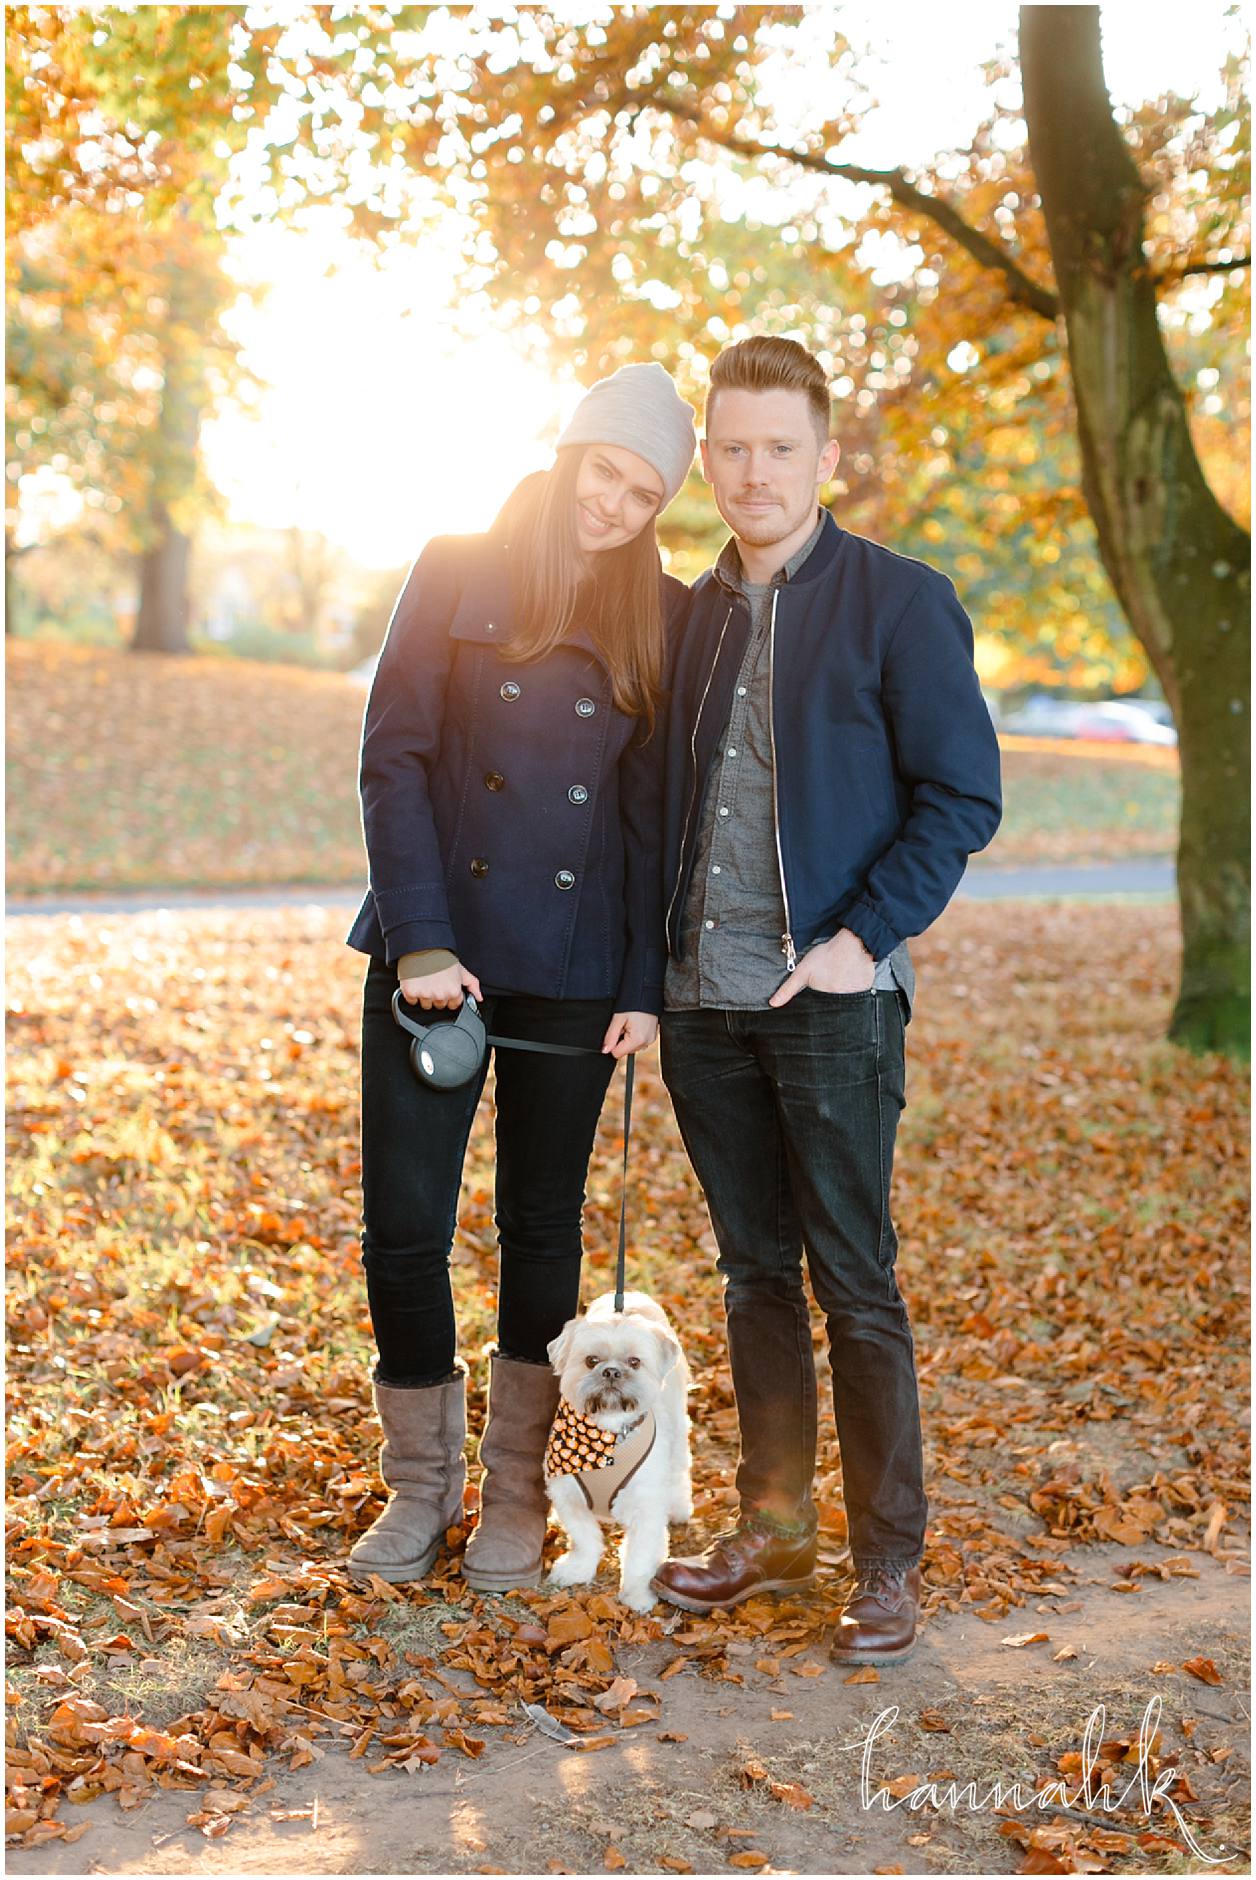 hannah-k-photography-coventry-warwickshire-west-midlands-engagement-photographer-5